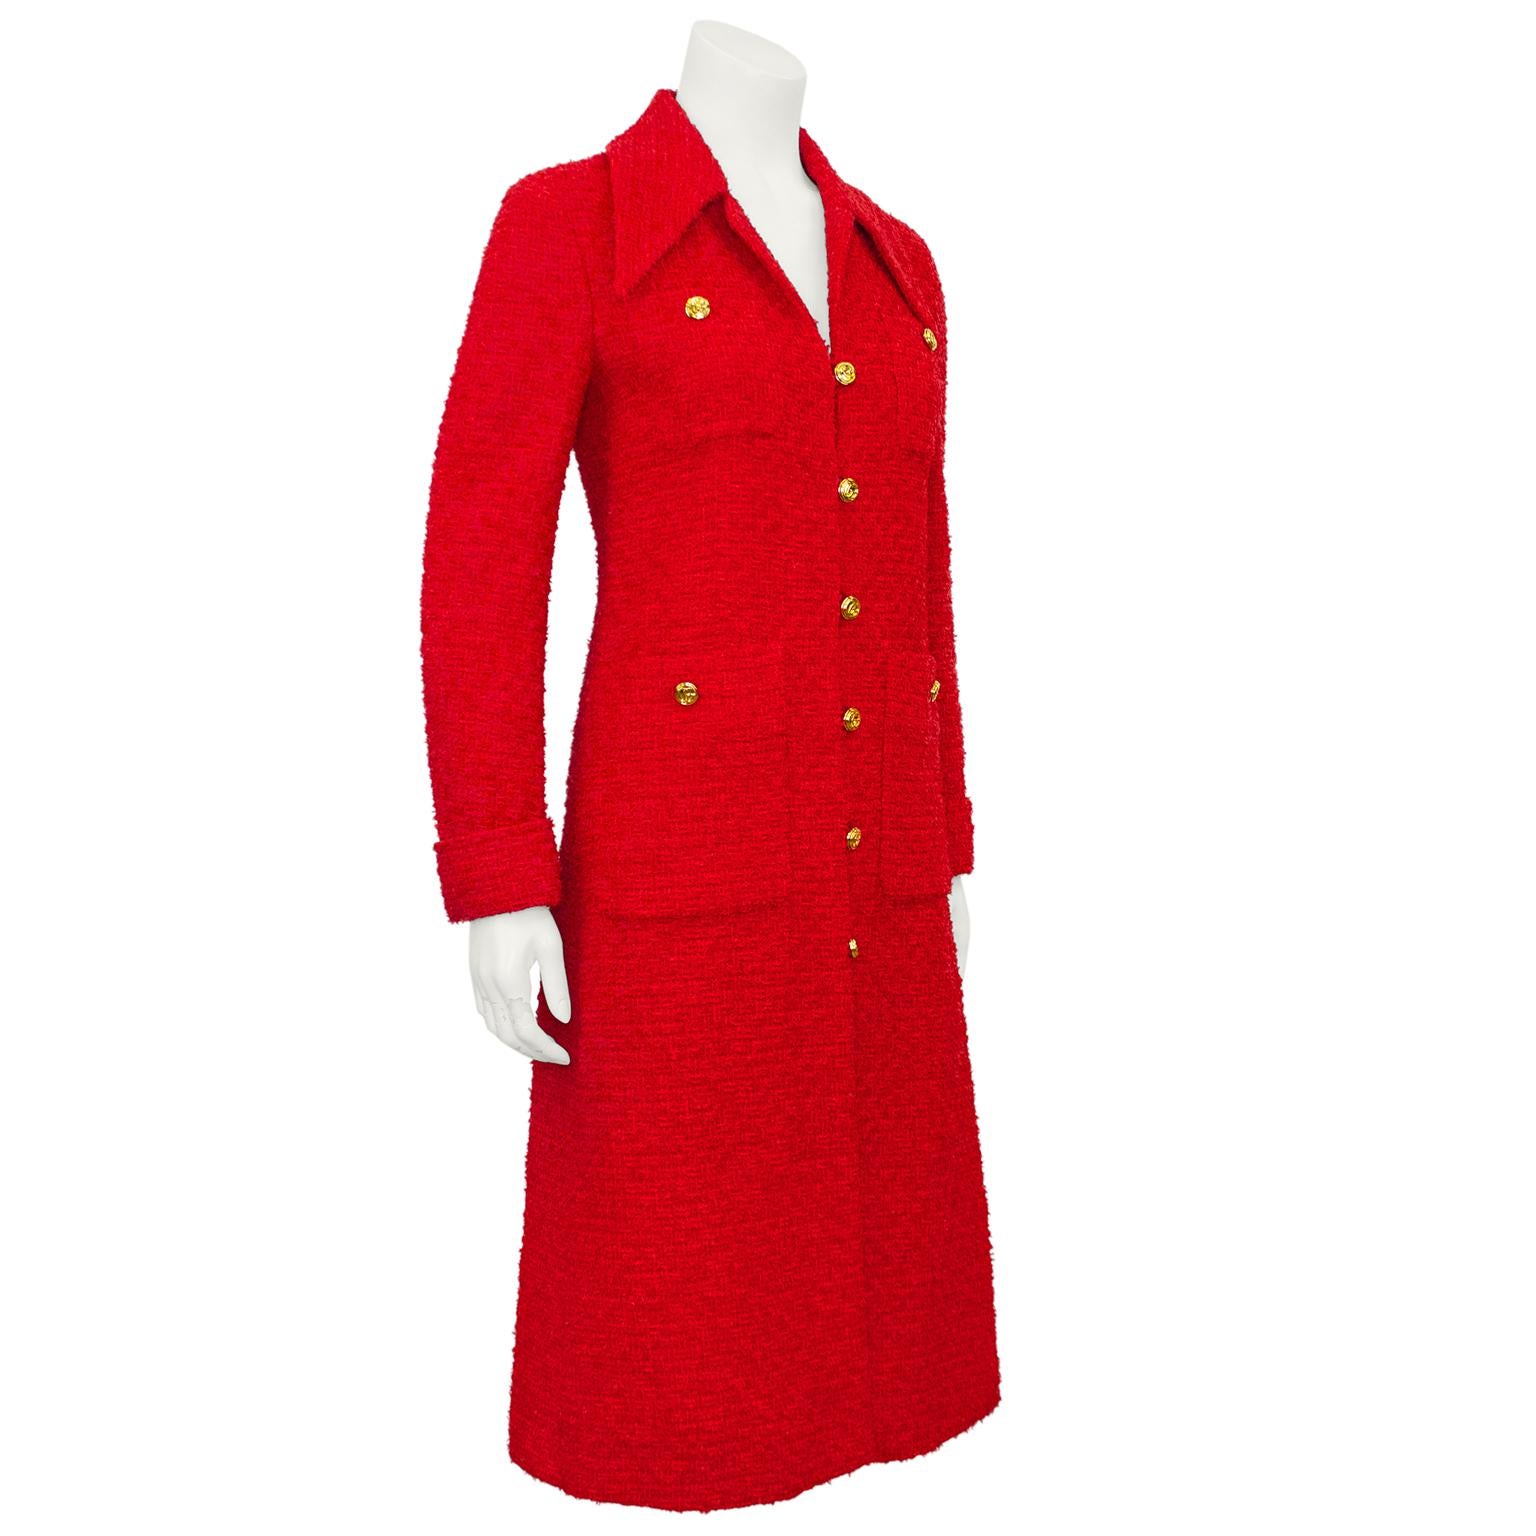 A fabulous long red jacket from Alessandro Michele's for Gucci era, with a nod to classic Chanel. Red bouclé tweed with a large pointed collar, patch pockets at the bust and hips and folded cuffs. Contrasting gold tone metal interlocking GG buttons.